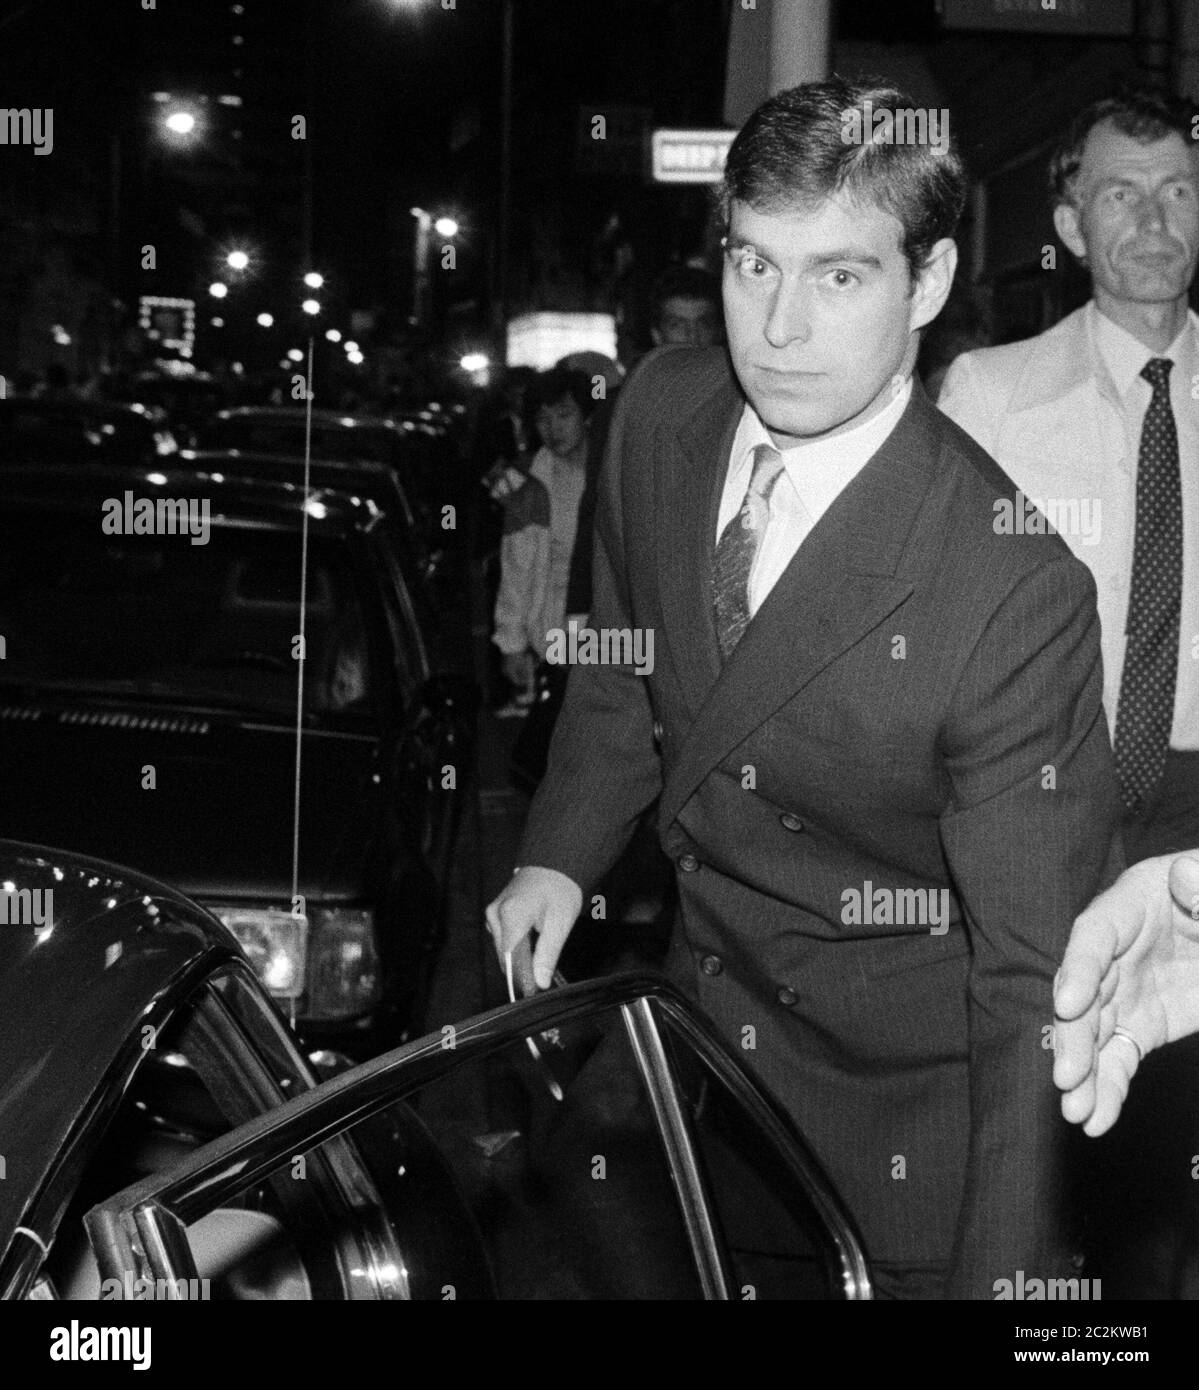 LONDON, UK. c. 1986: HRH Prince Andrew Duke of York at a party in ...